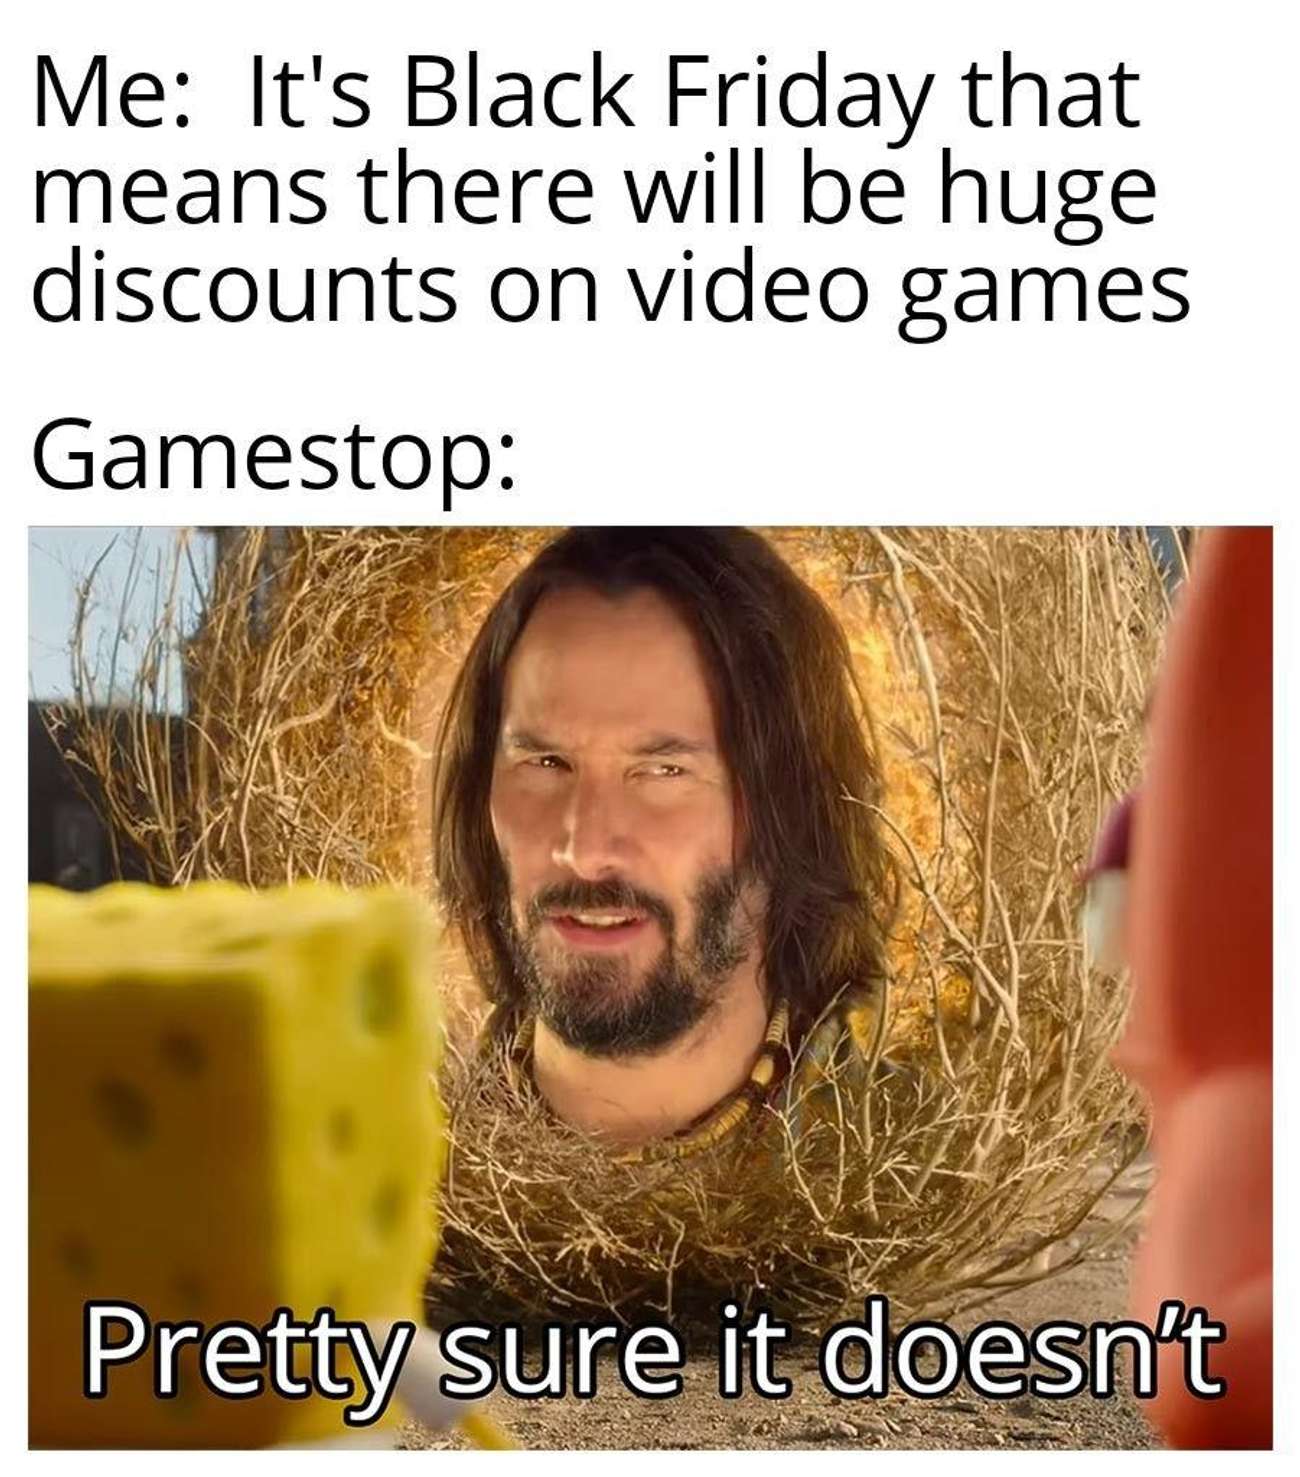 keanu reeves sage - Me It's Black Friday that means there will be huge discounts on video games Gamestop Pretty sure it doesn't